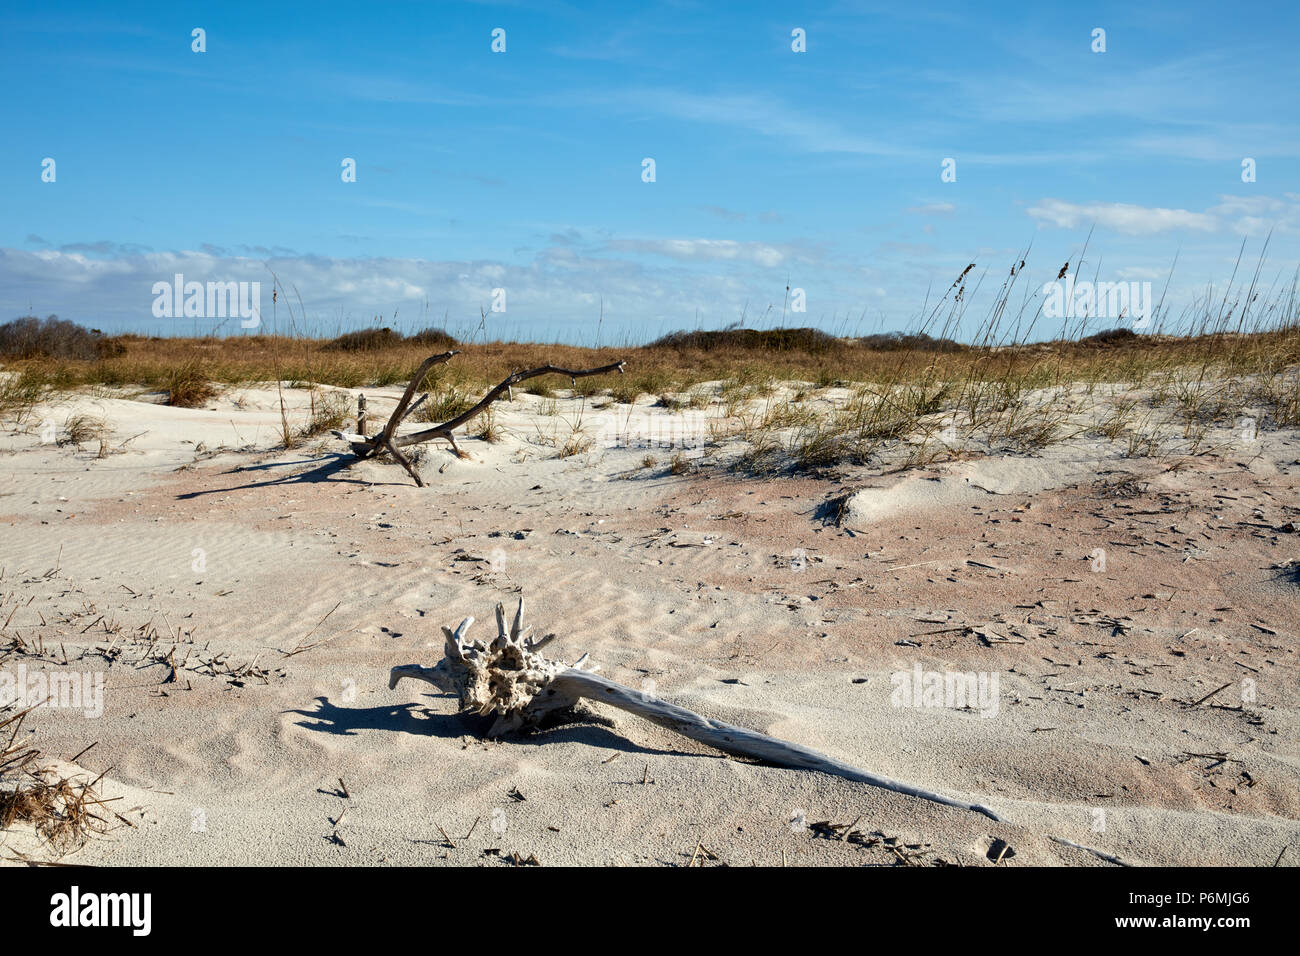 Driftwood on the beach, Amelia Island, Floride Banque D'Images